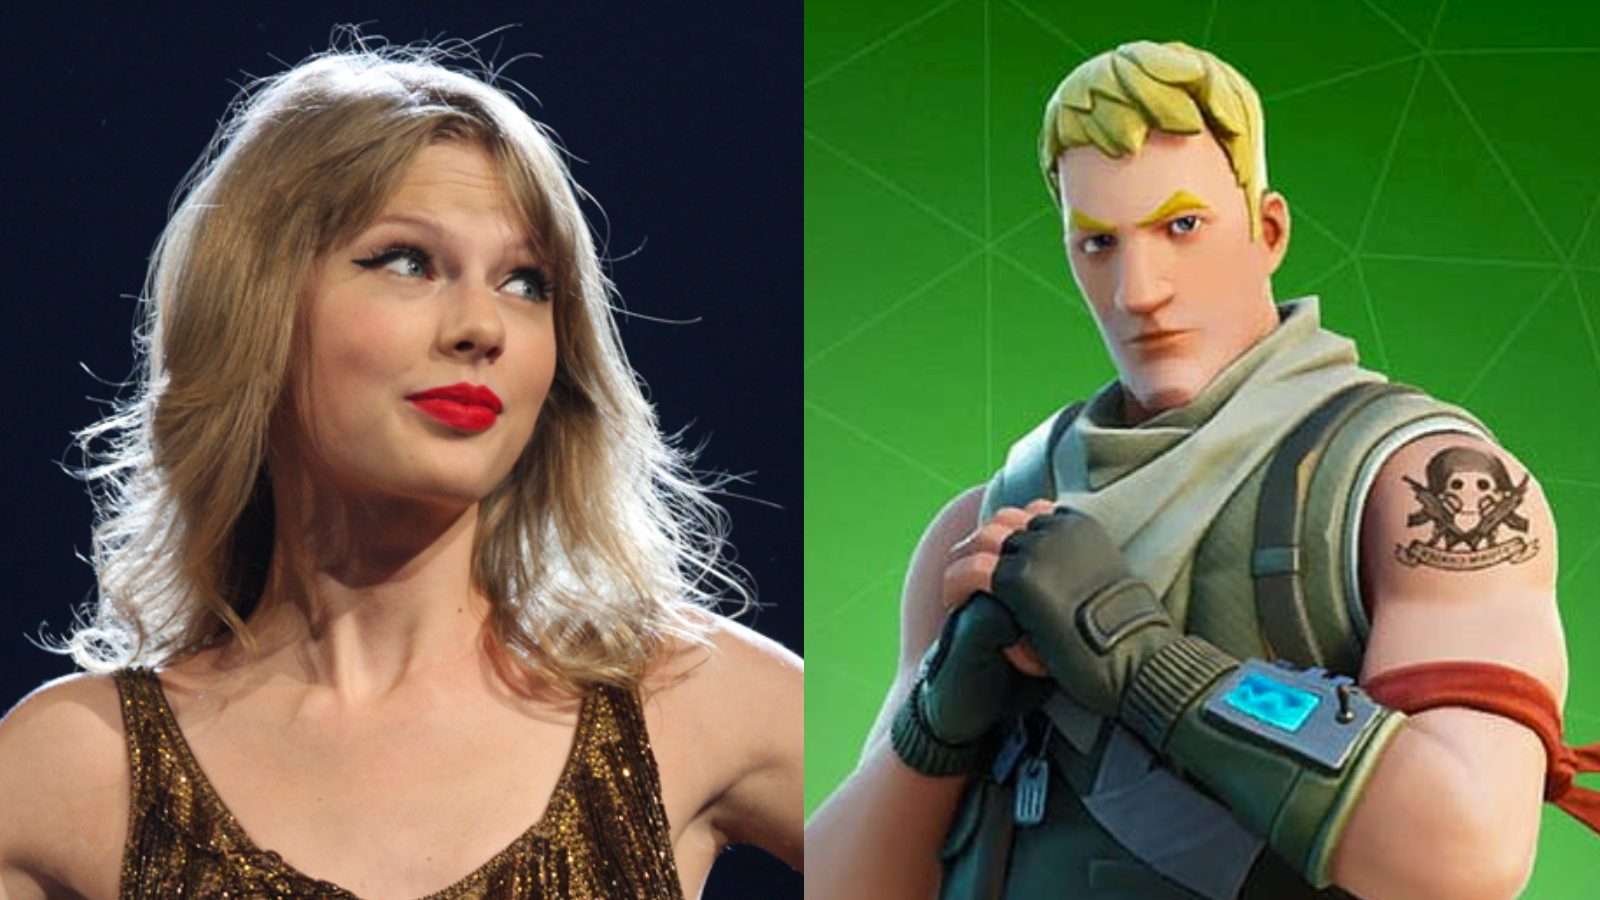 Taylor Swift and a character from the game Fortnite.